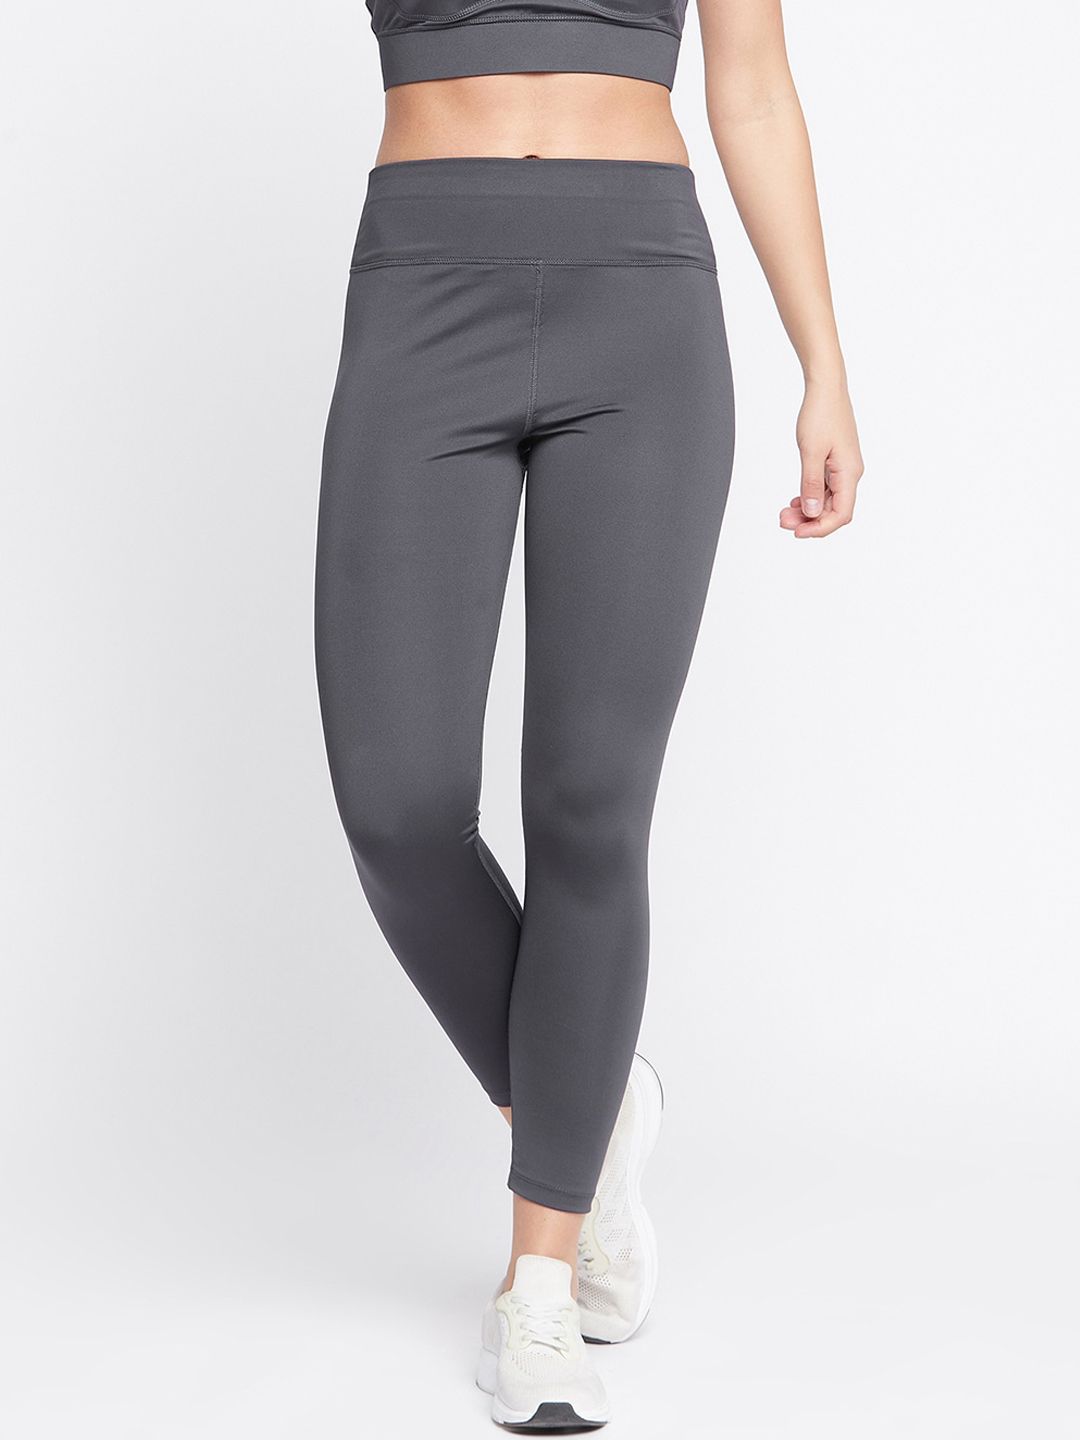 Clovia Women Grey Solid Anti Odour Snug Fit Active Tights Price in India